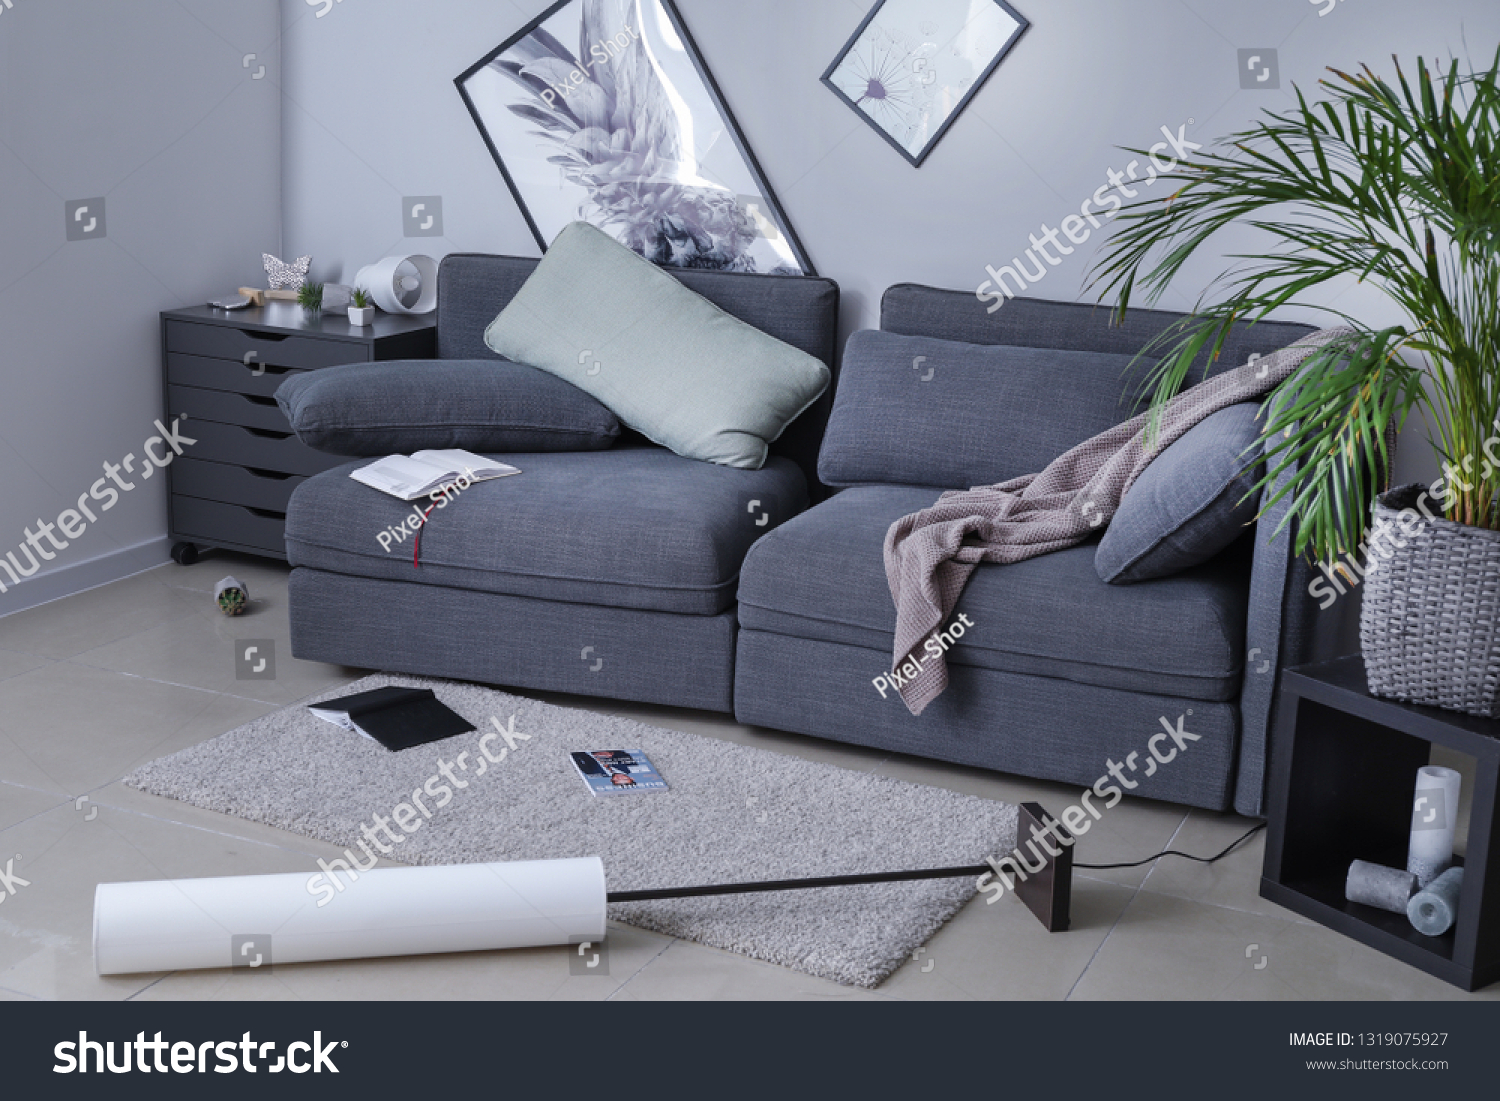 Interior of flat after earthquake #1319075927